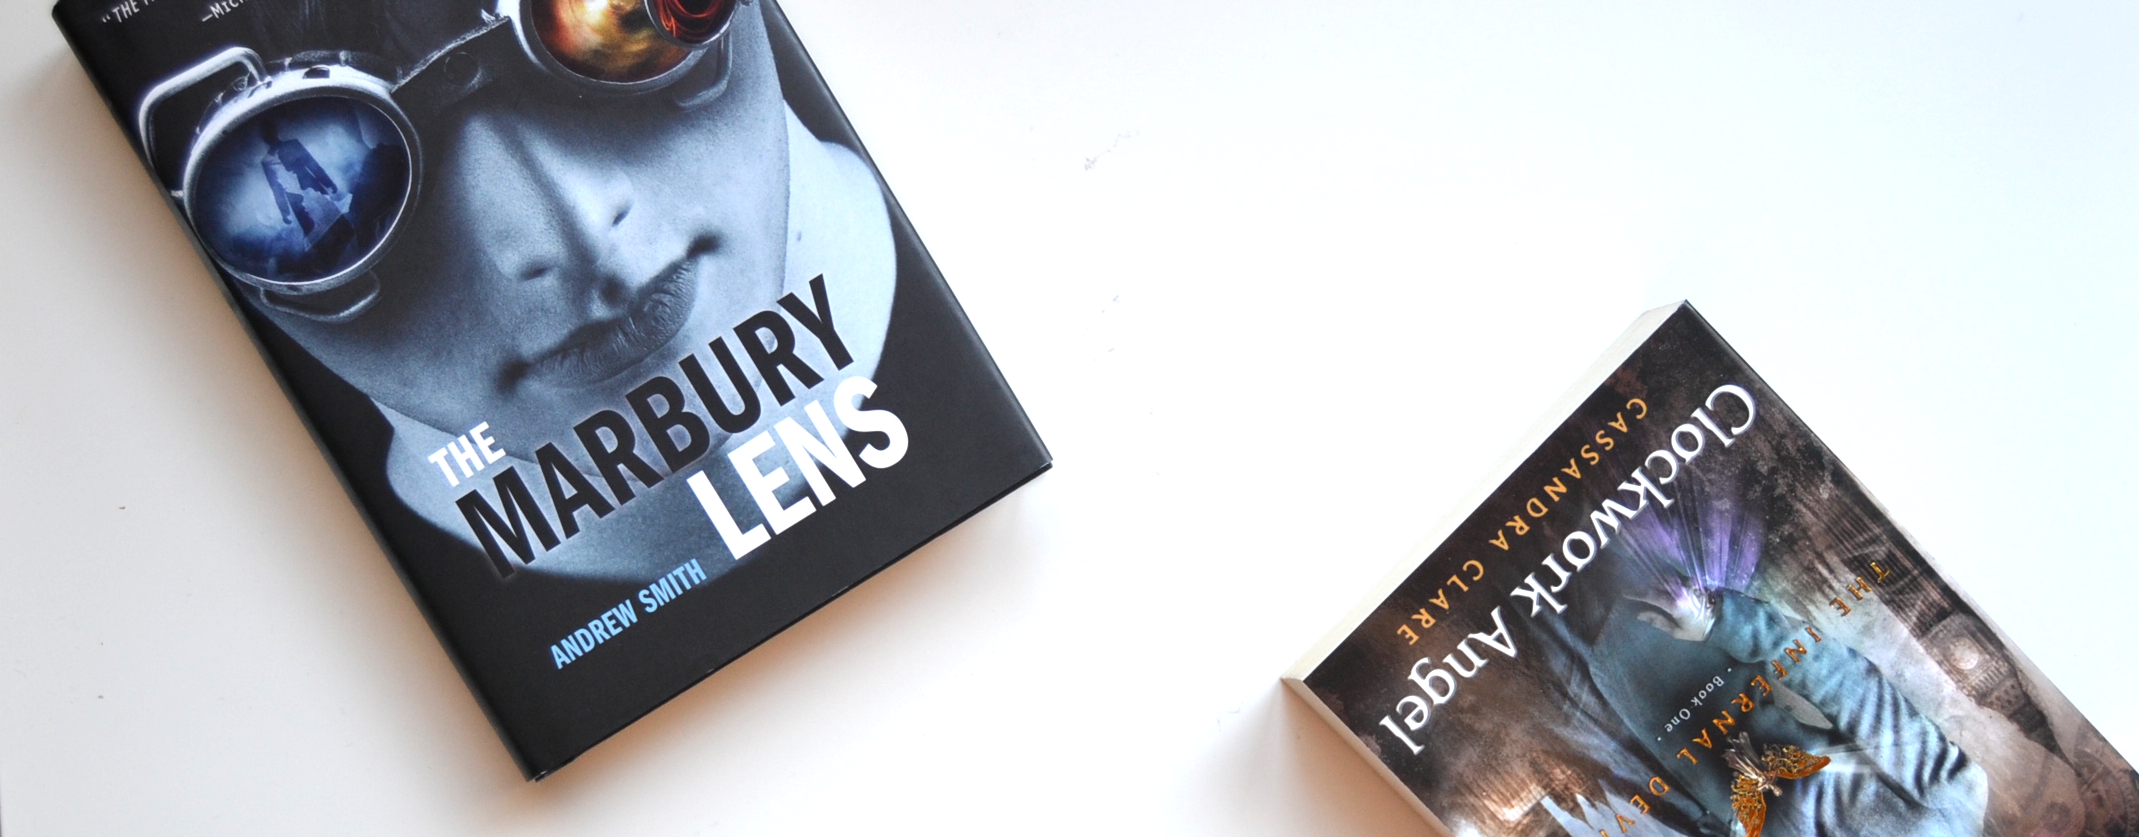 The Marbuy Lens and Clockwork Angel books